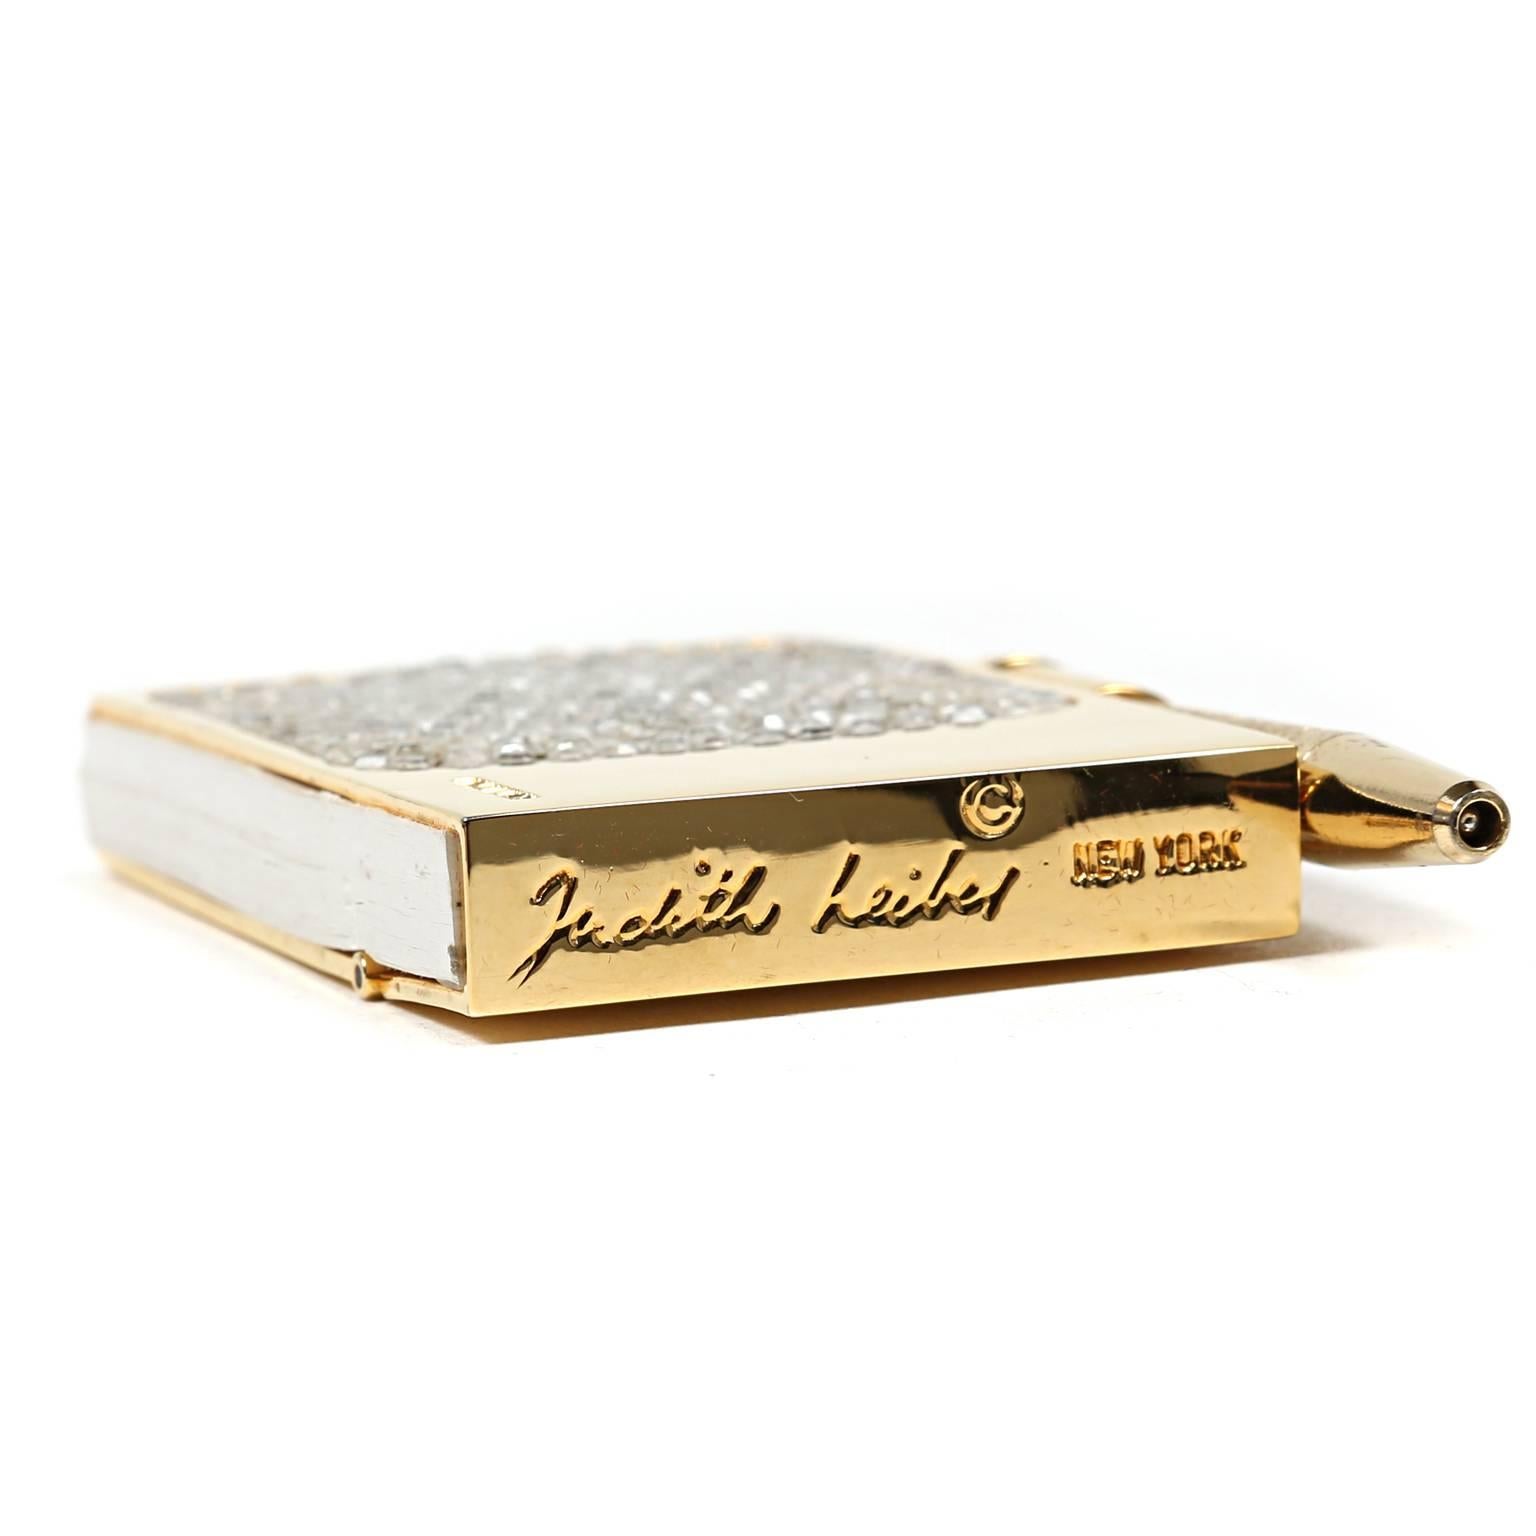 Judith Leiber Crystal Mini Pad- NEW
  The perfect gift for the woman who has everything, this demure notepad oozes luxury.
Gold tone hard cased mini notepad is encrusted with crystals.  Hinged top flips up to access a small pad of white paper. 